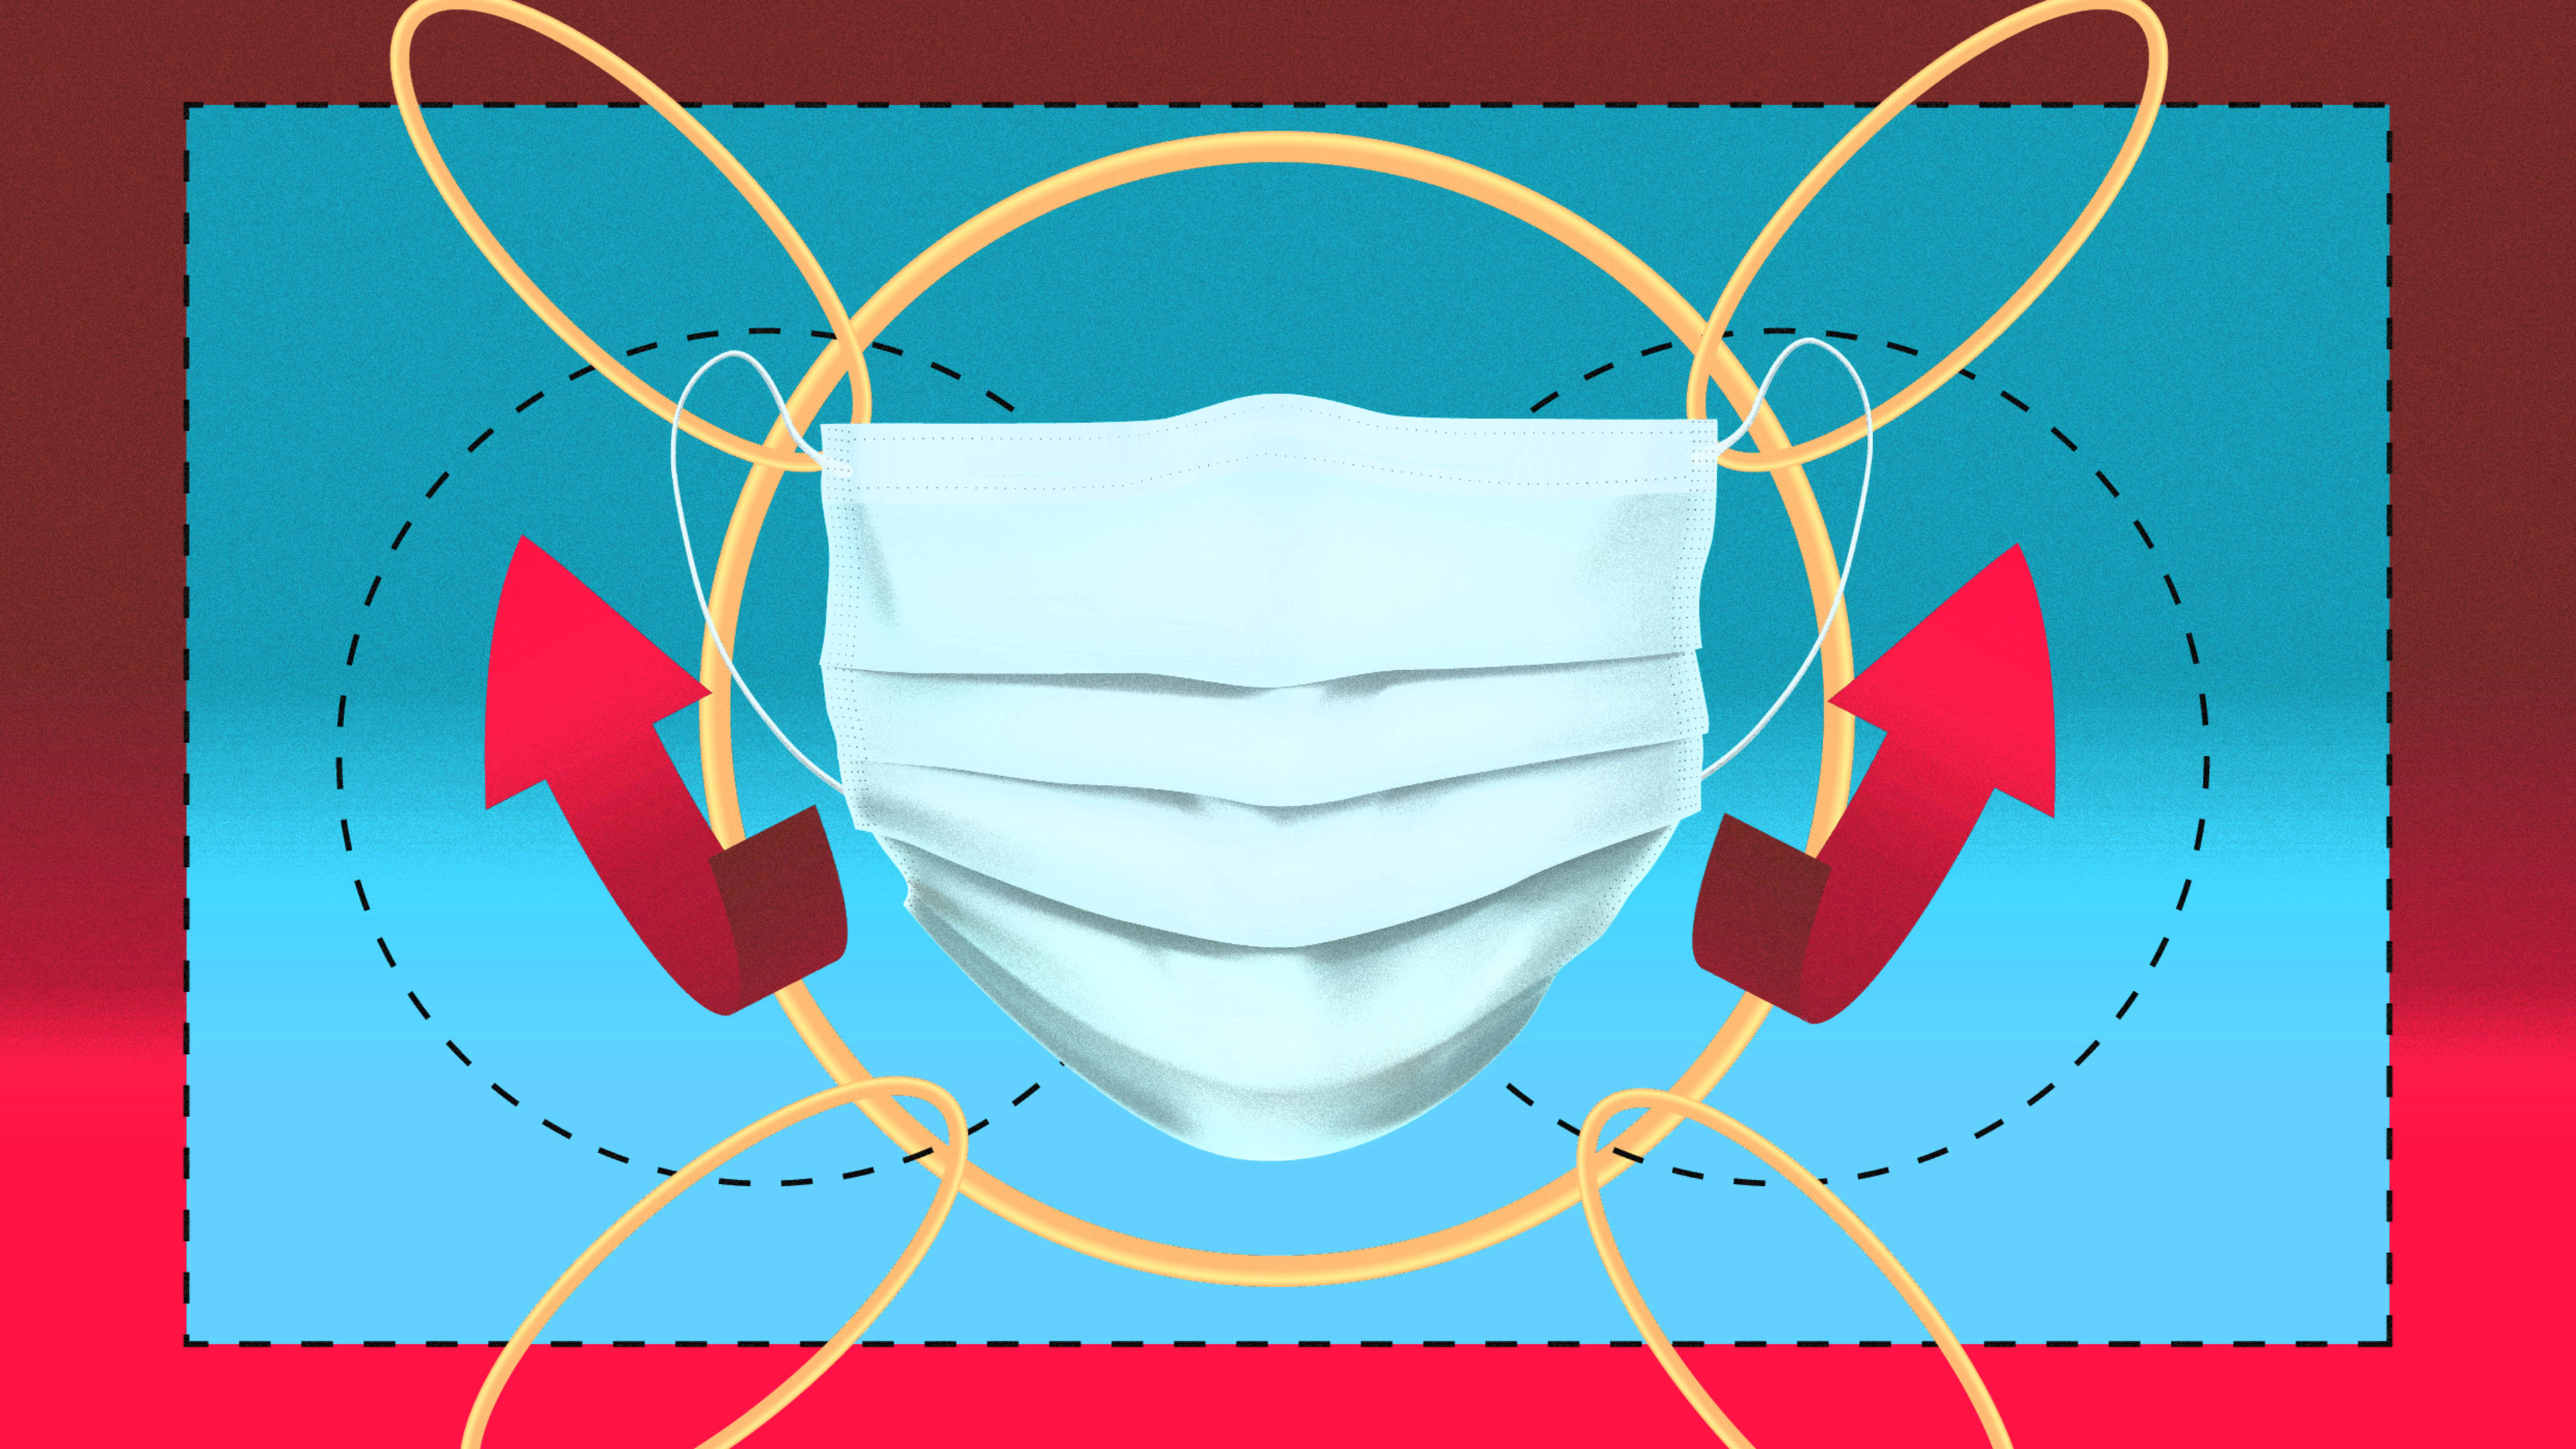 If you don’t want to double mask, here’s how to make surgical masks more effective